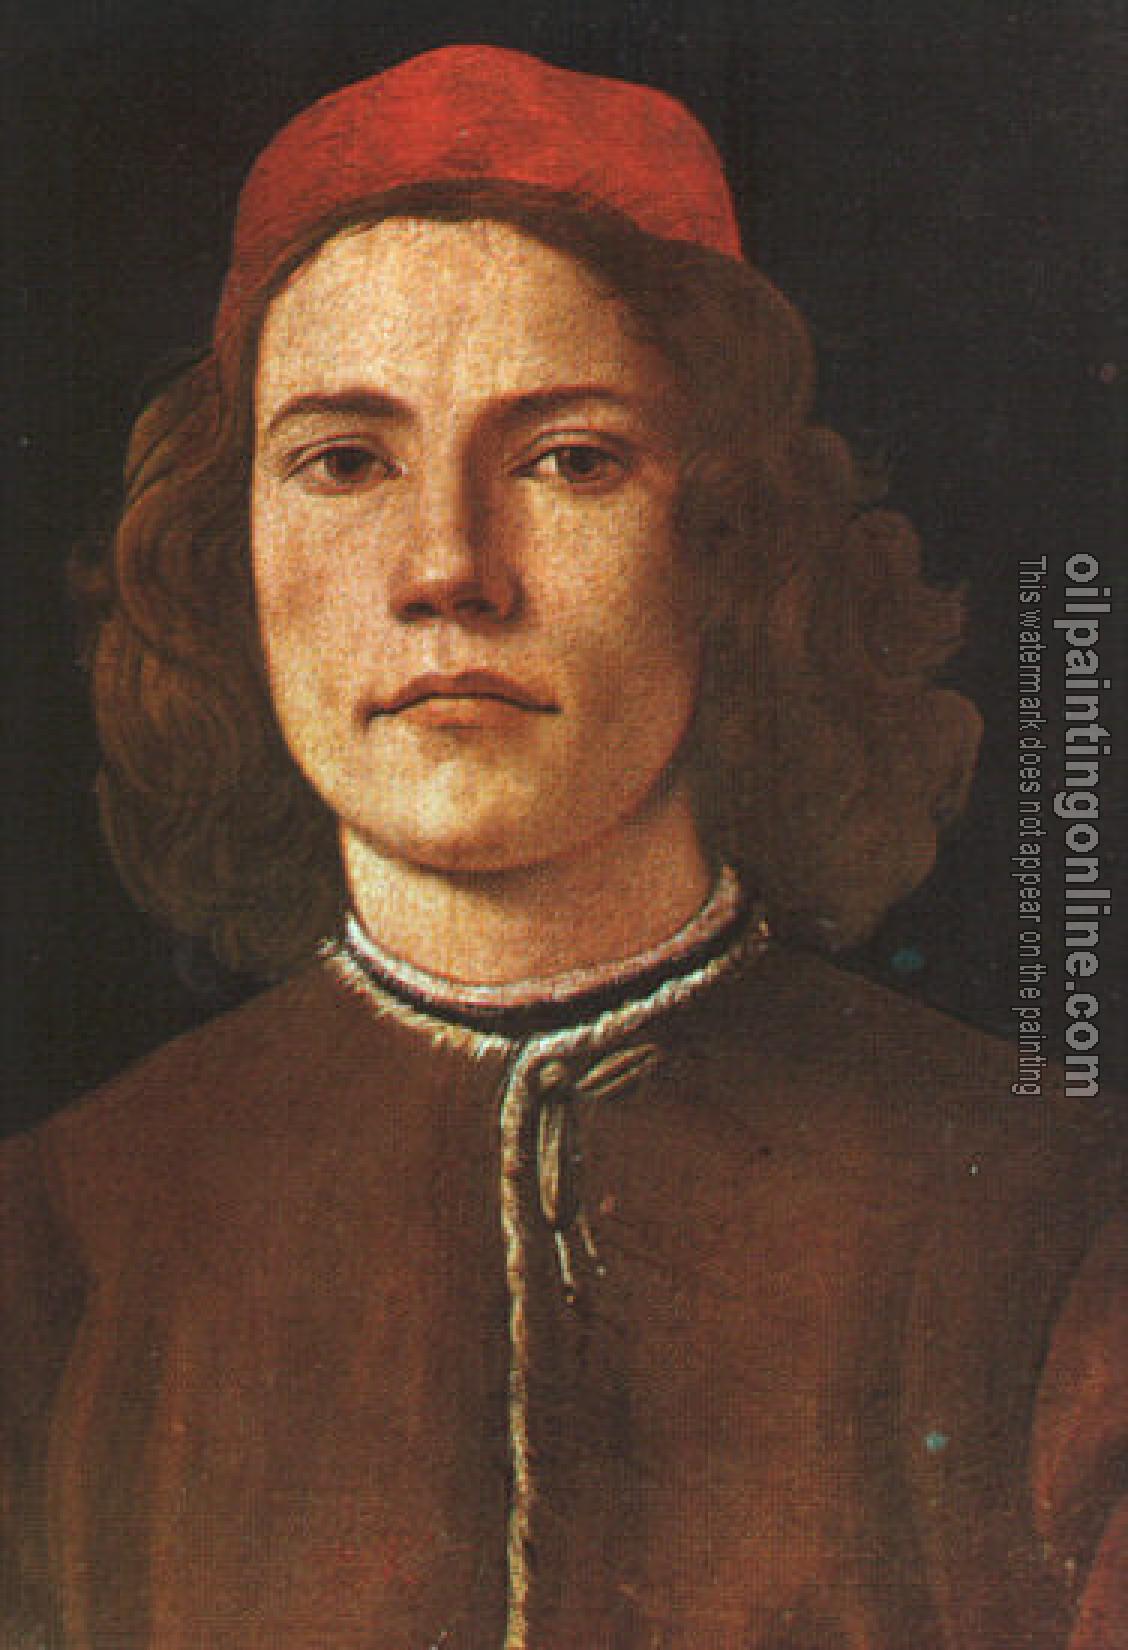 Botticelli, Sandro - Portrait of a Young Man